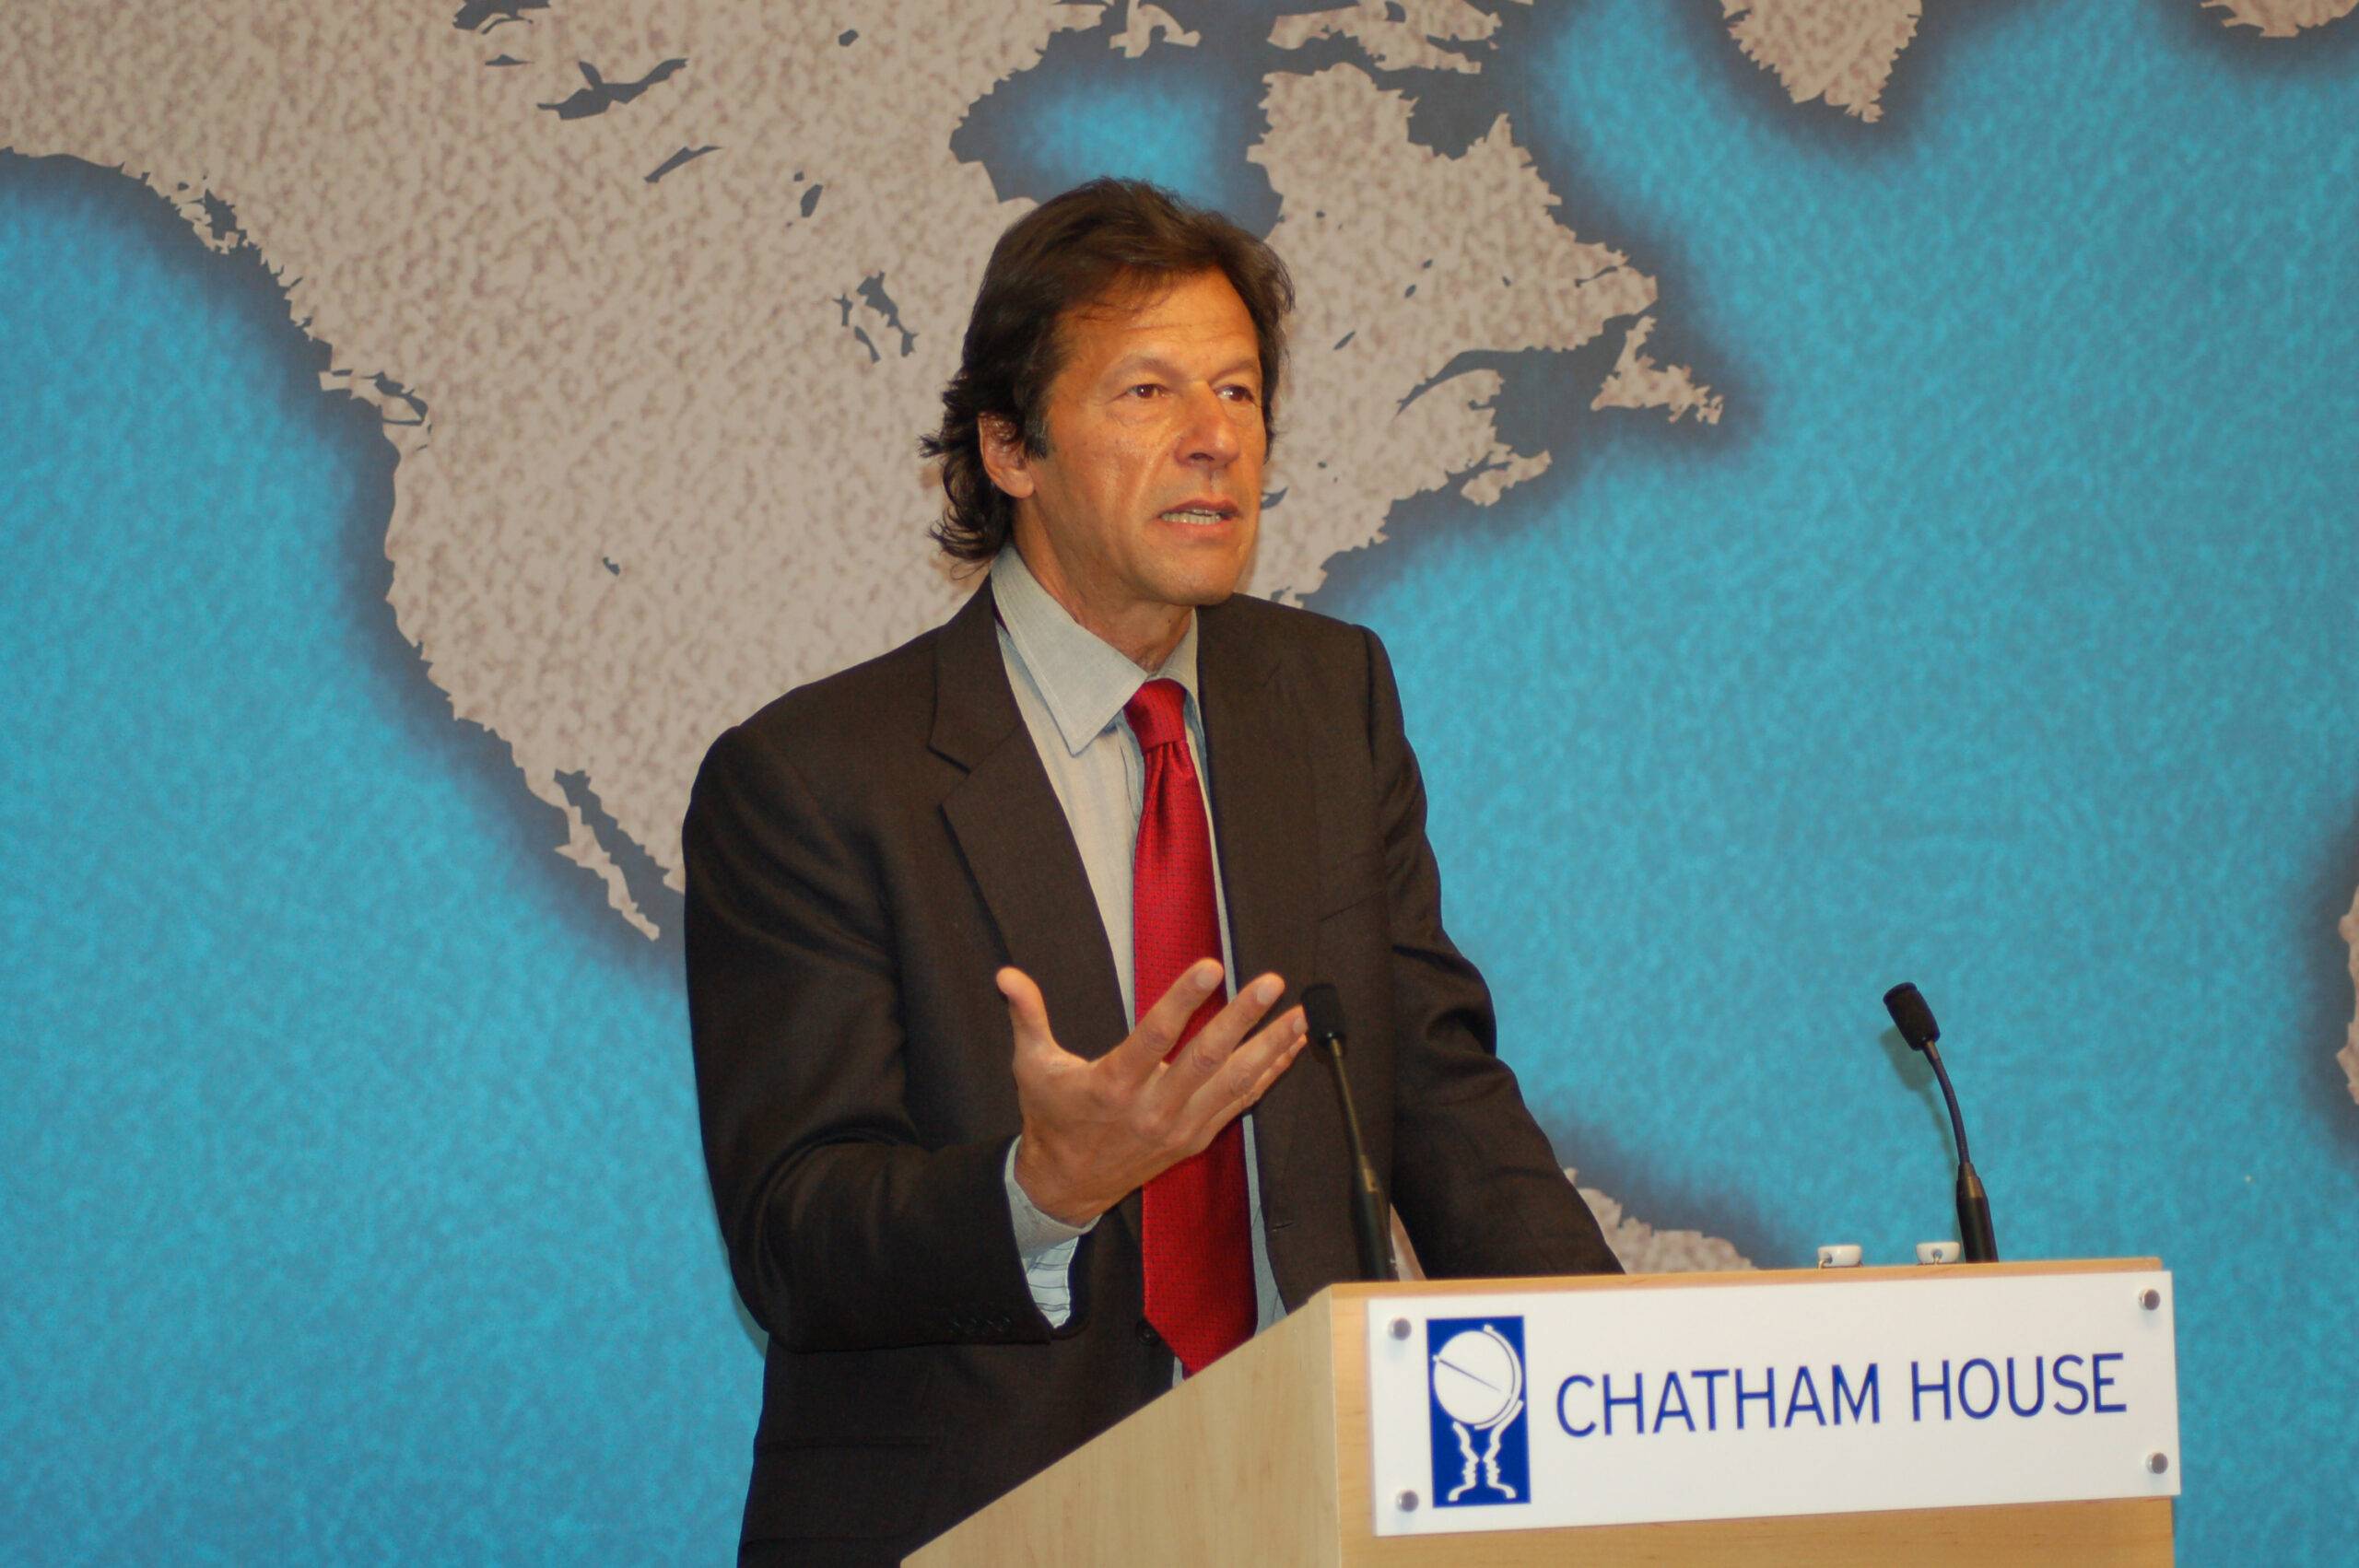 under pressure to recognize Israel says Imran Khan